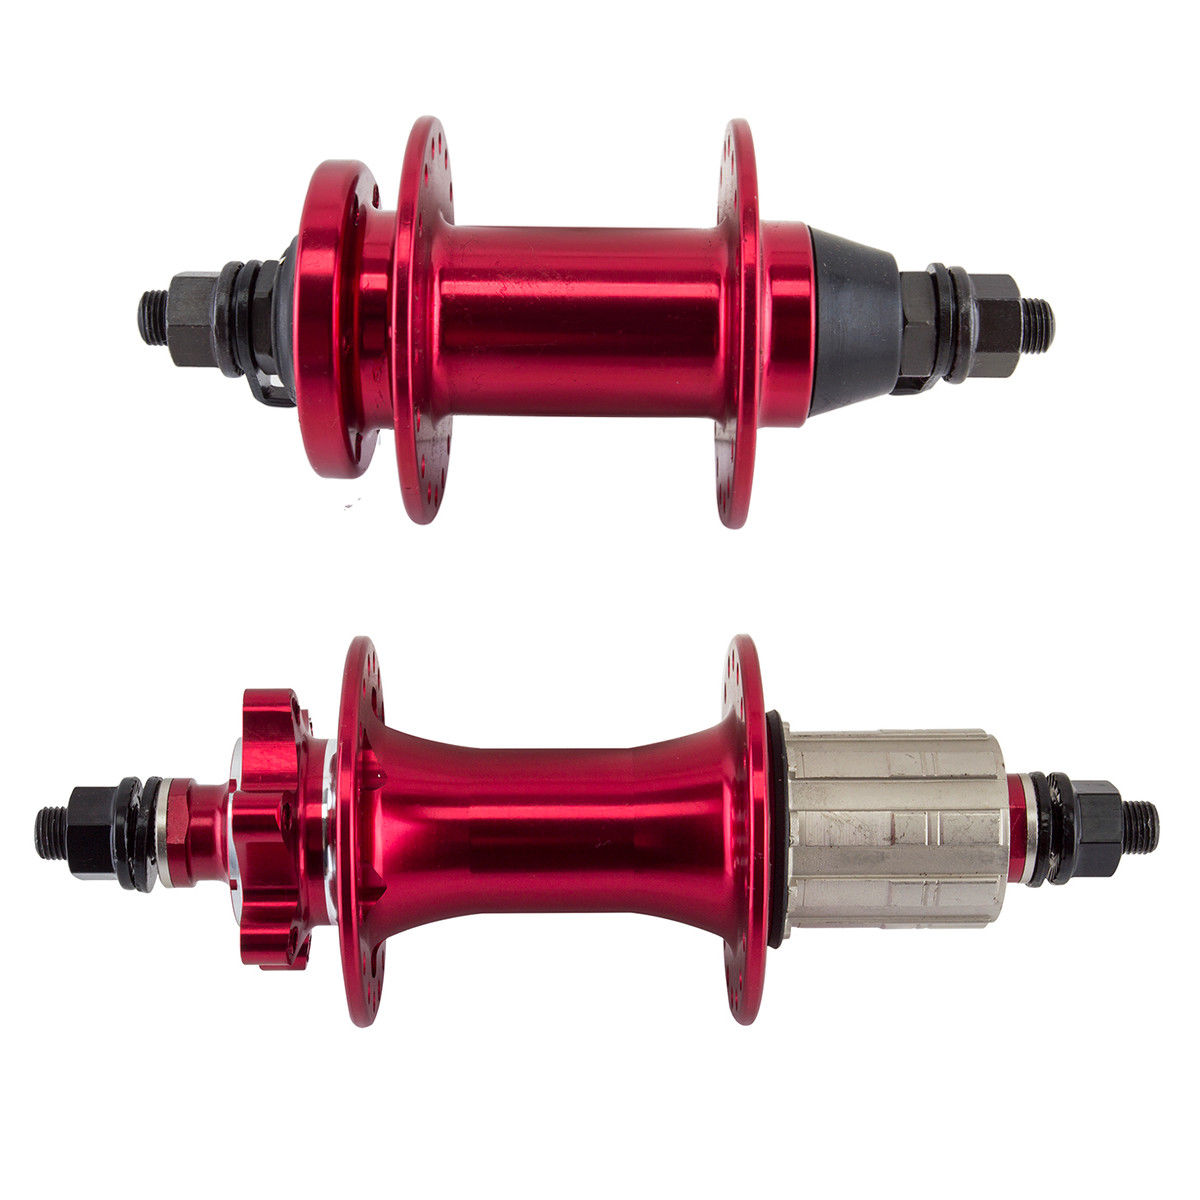 SE Racing OM Duro Hubset - 3/8" axles - 36H - 110/148mm 8-10spd - Red Anodized